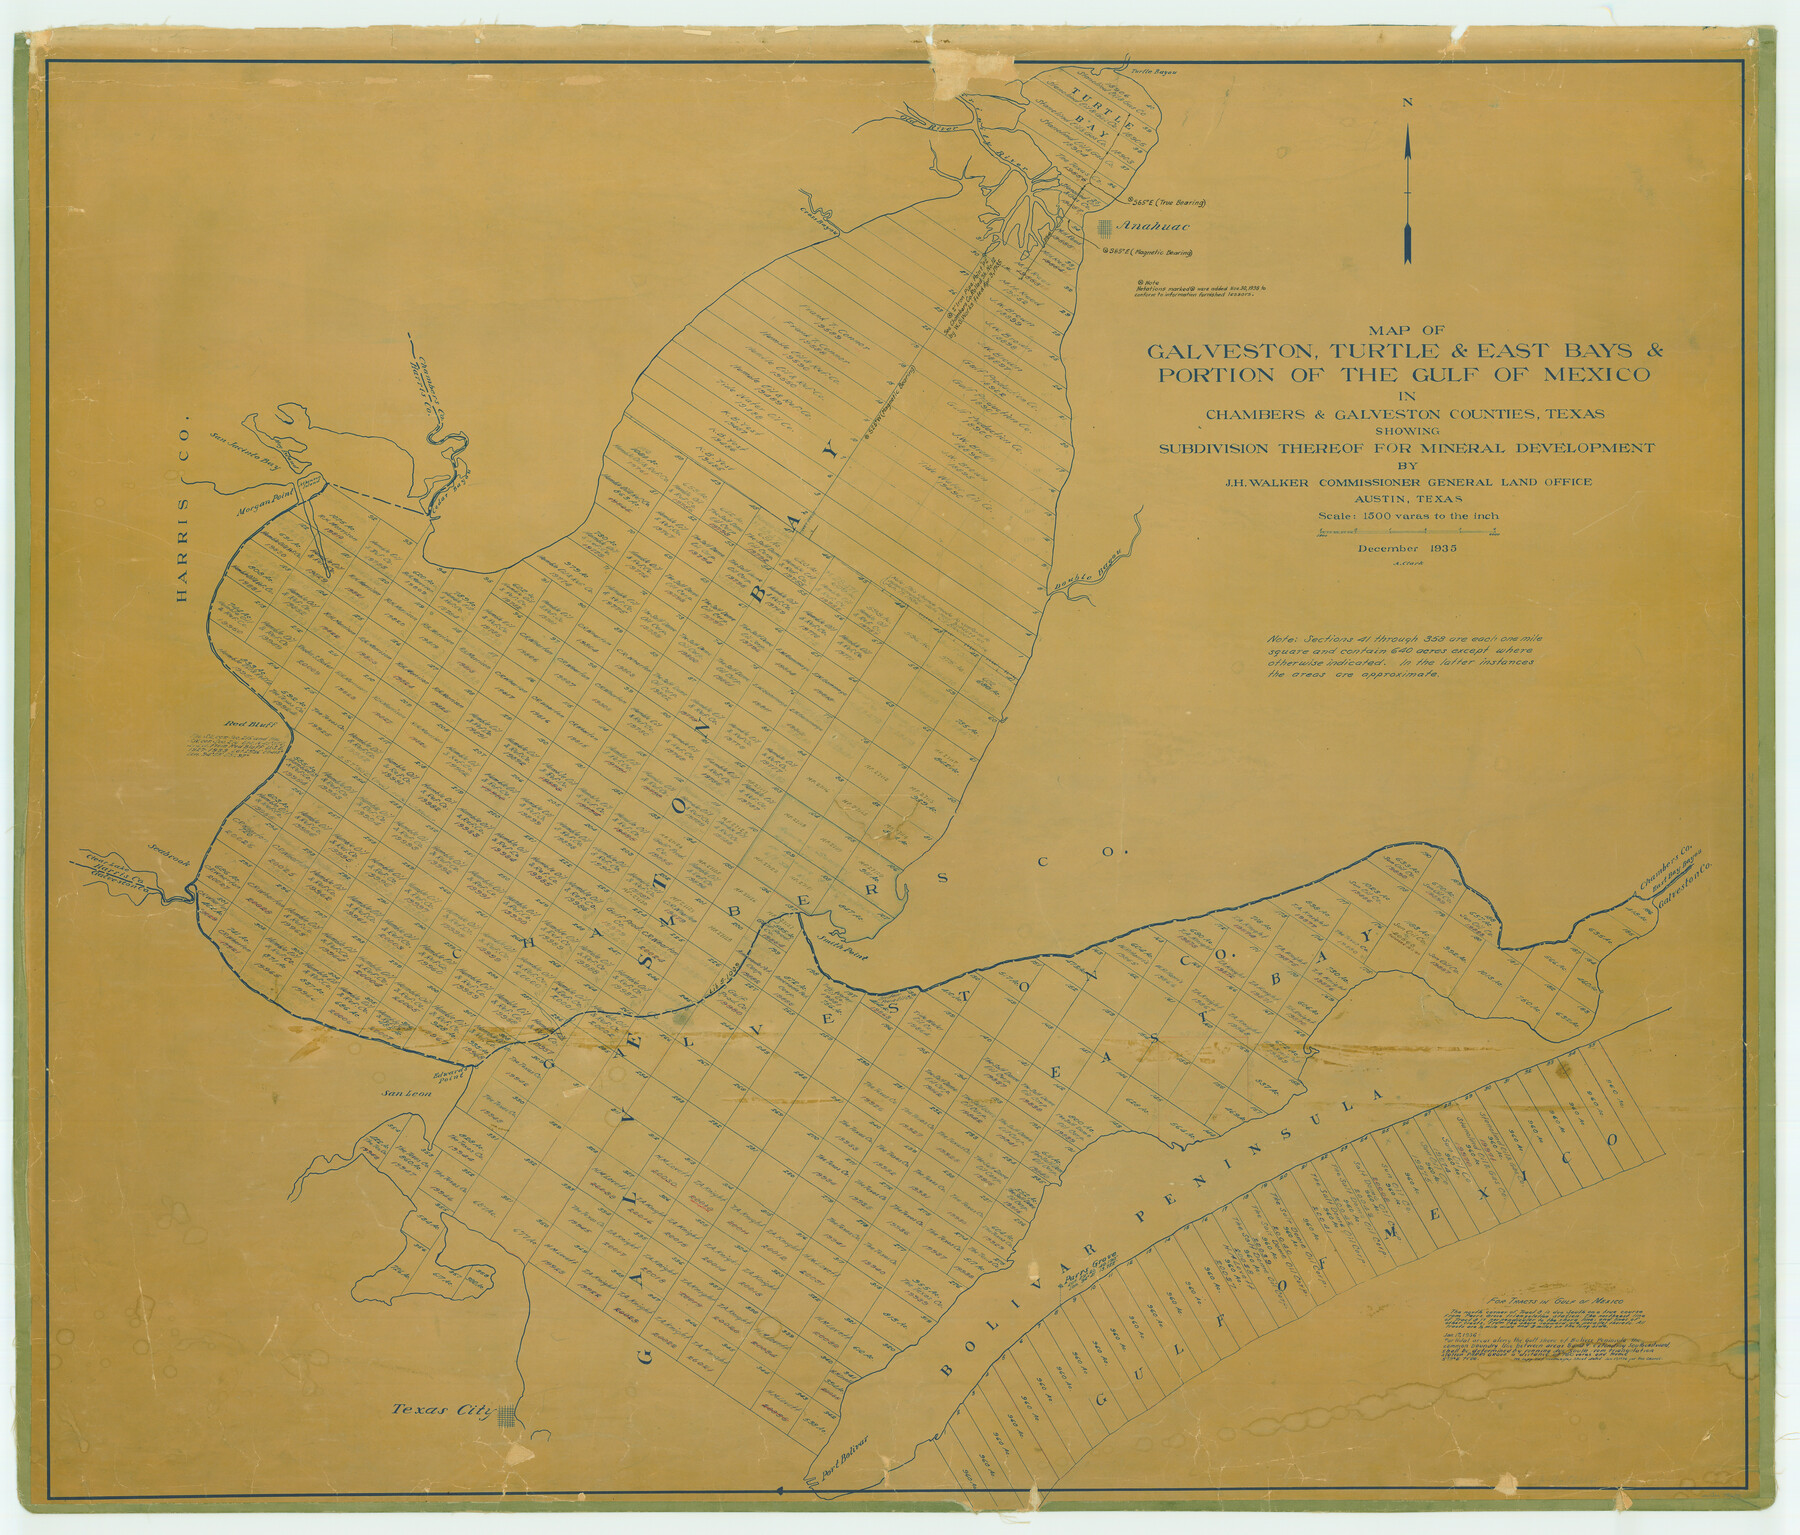 78633, Map of Galveston, Turtle & East Bays & Portion of the Gulf of Mexico in Chambers & Galveston Counties, Texas Showing Subdivision Thereof for Mineral Development, General Map Collection